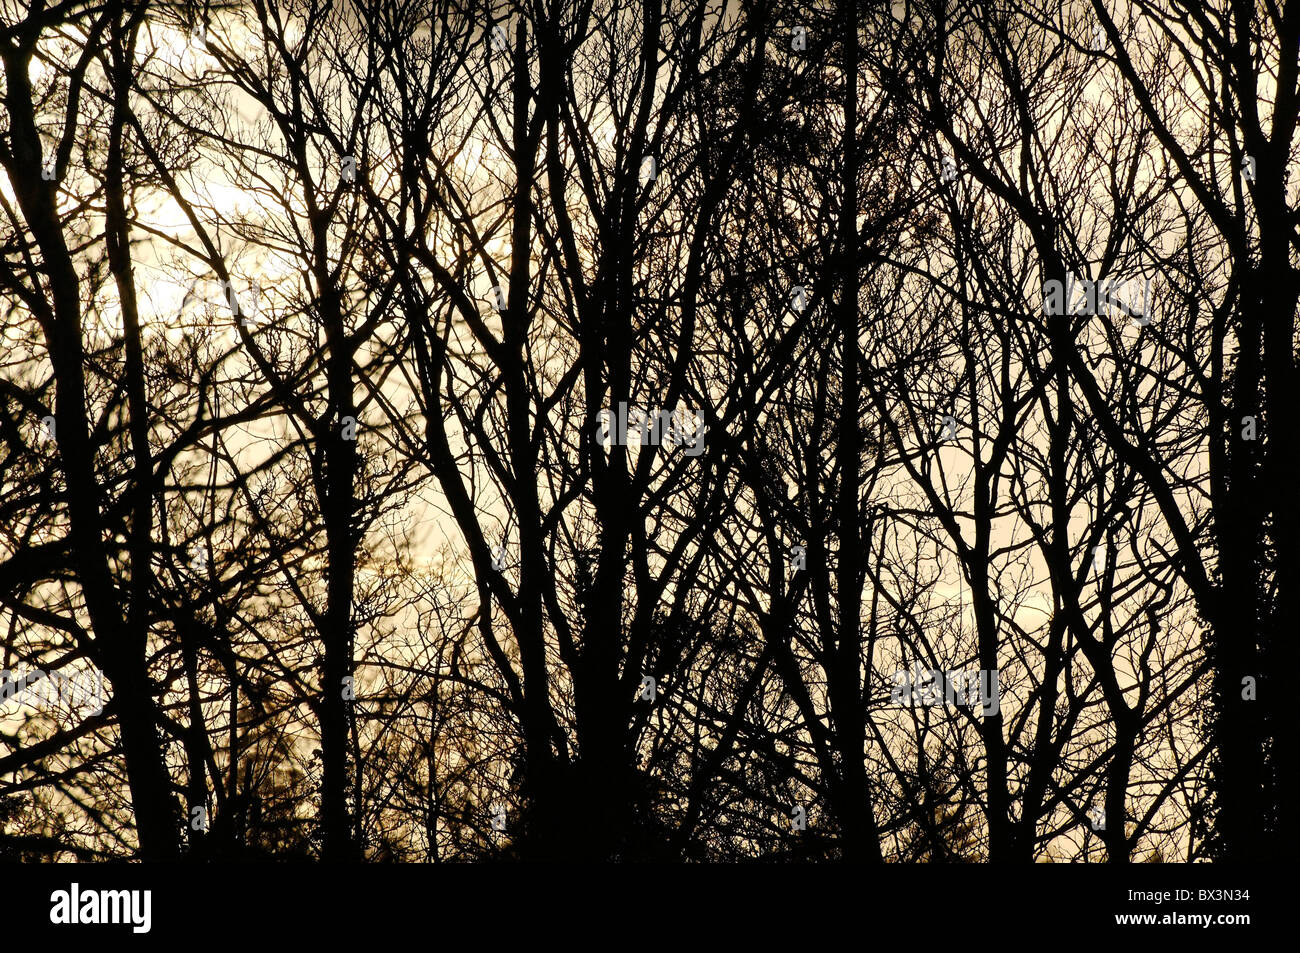 A group of trees nicely silhouetted Stock Photo